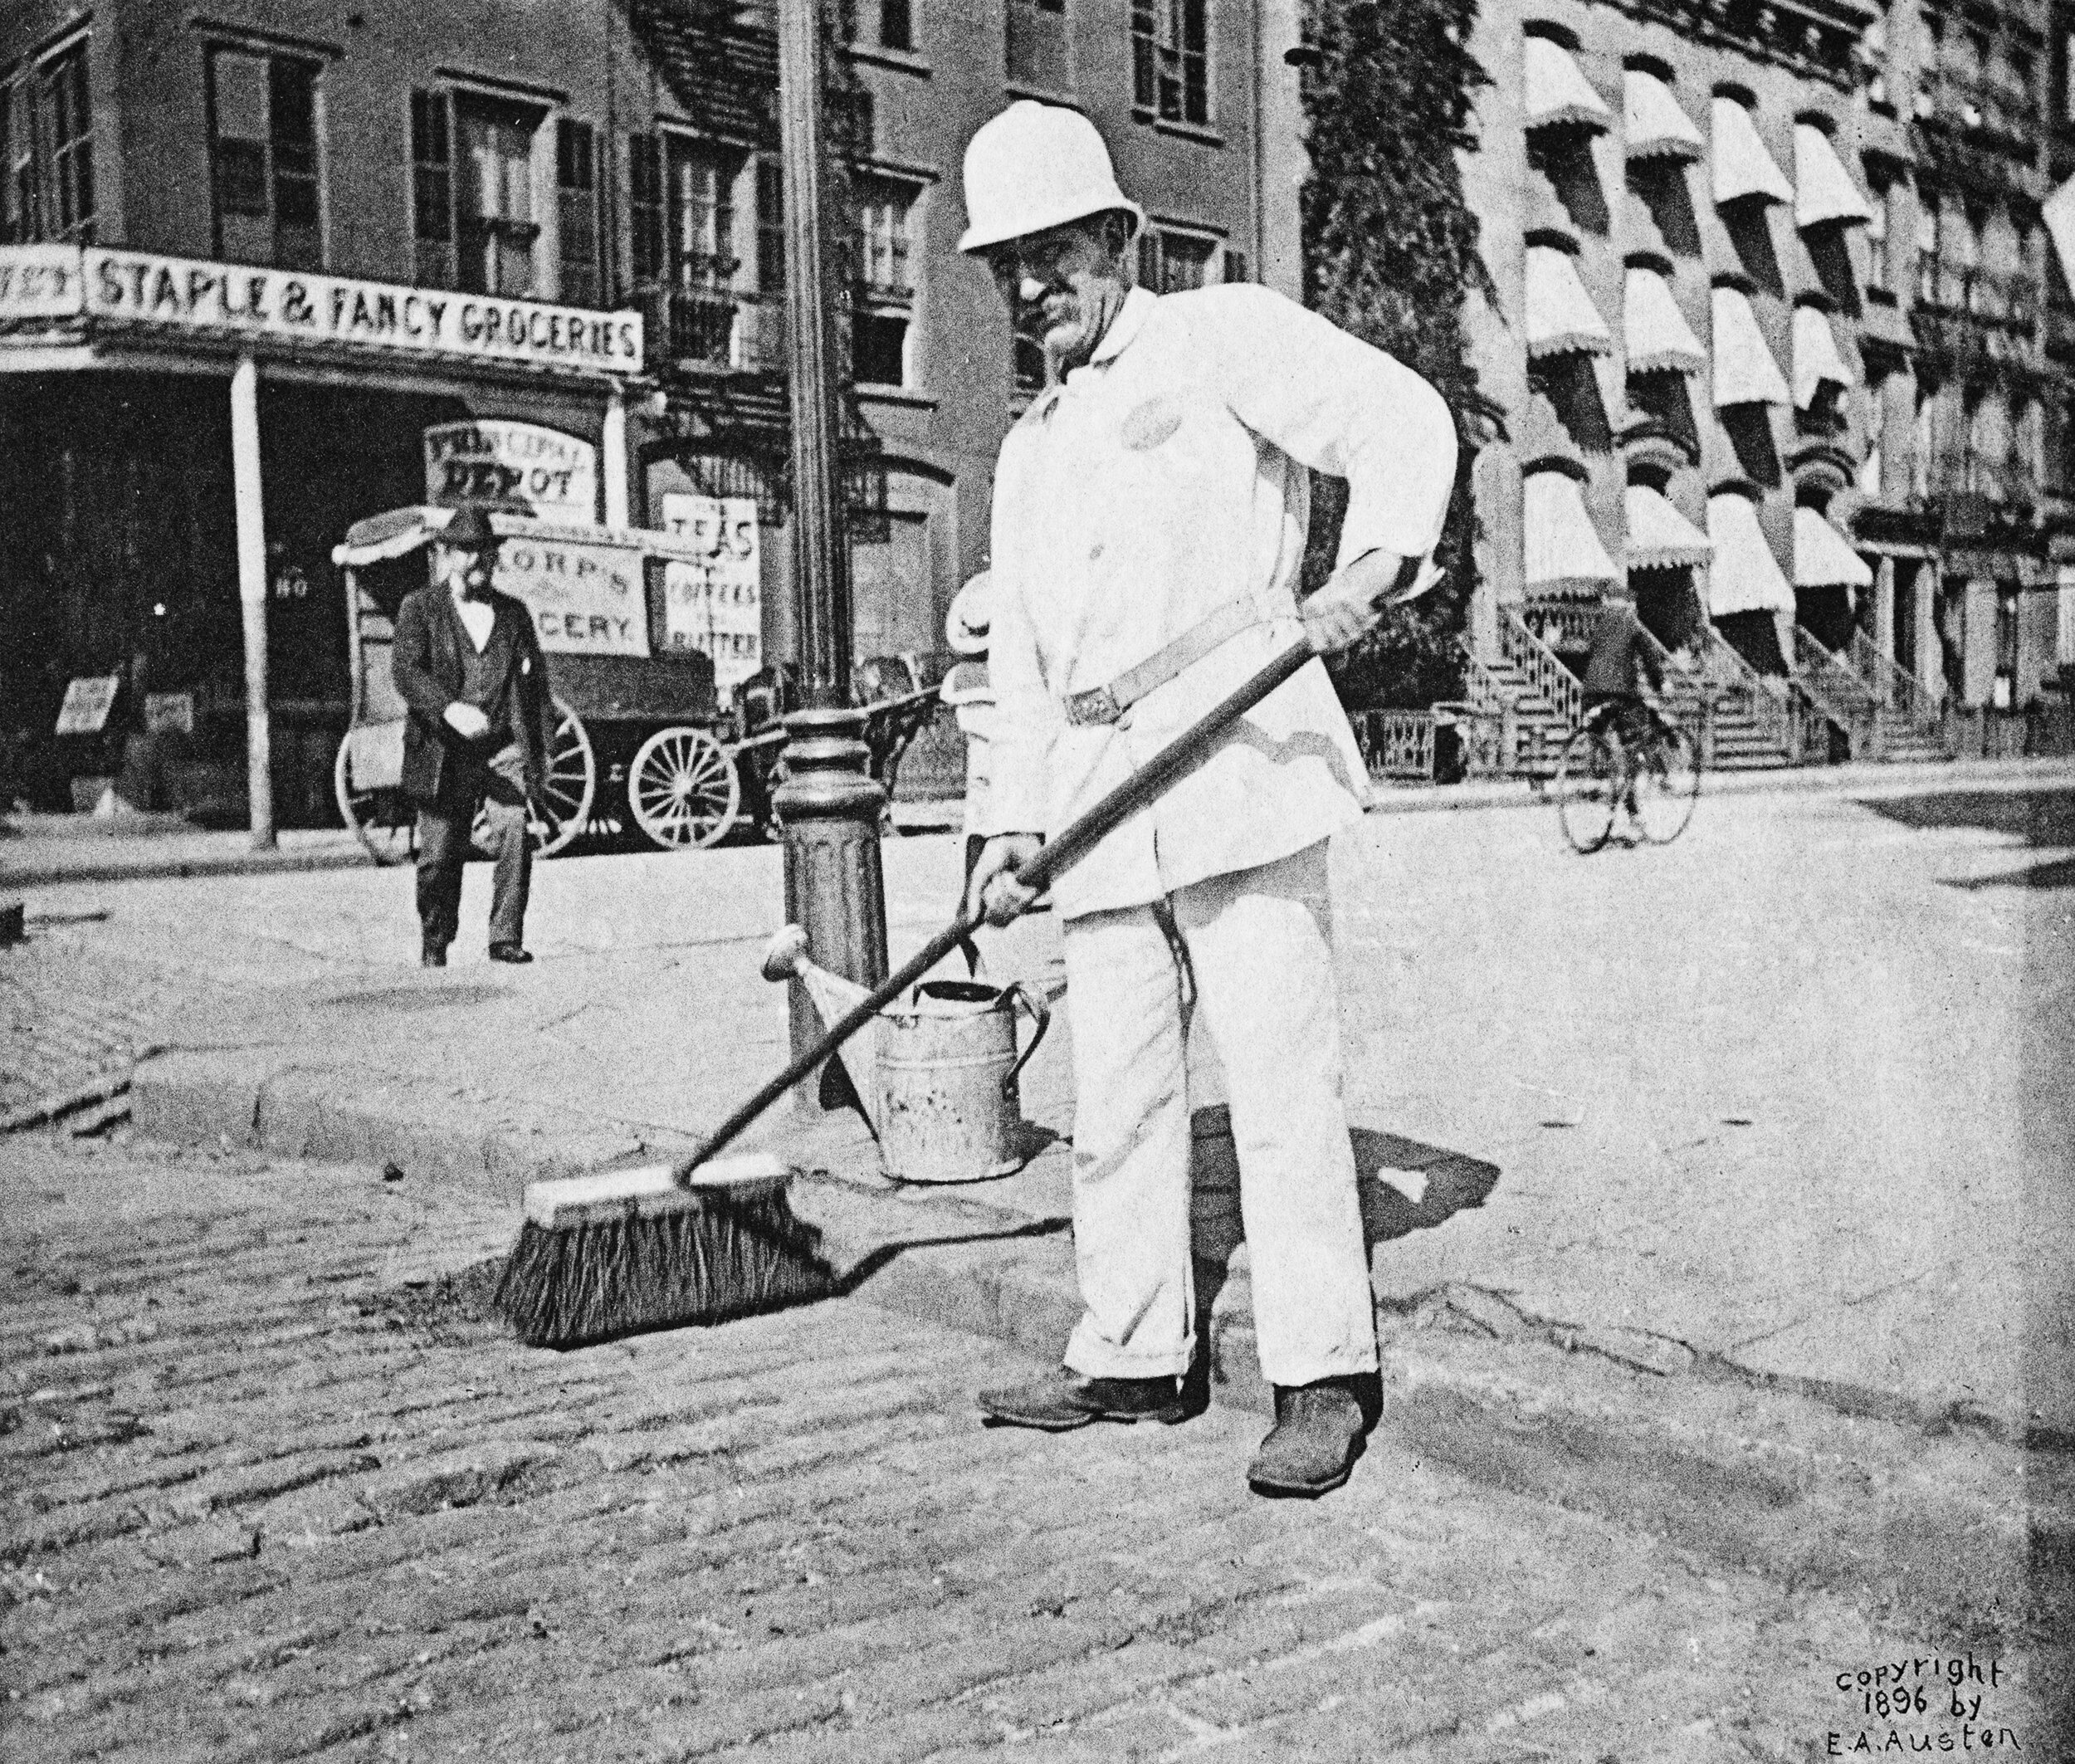   Street Sweeper, Forty-eight Street and Eight Avenue  Collection of Historic Richmond Town, 50.015.2156 